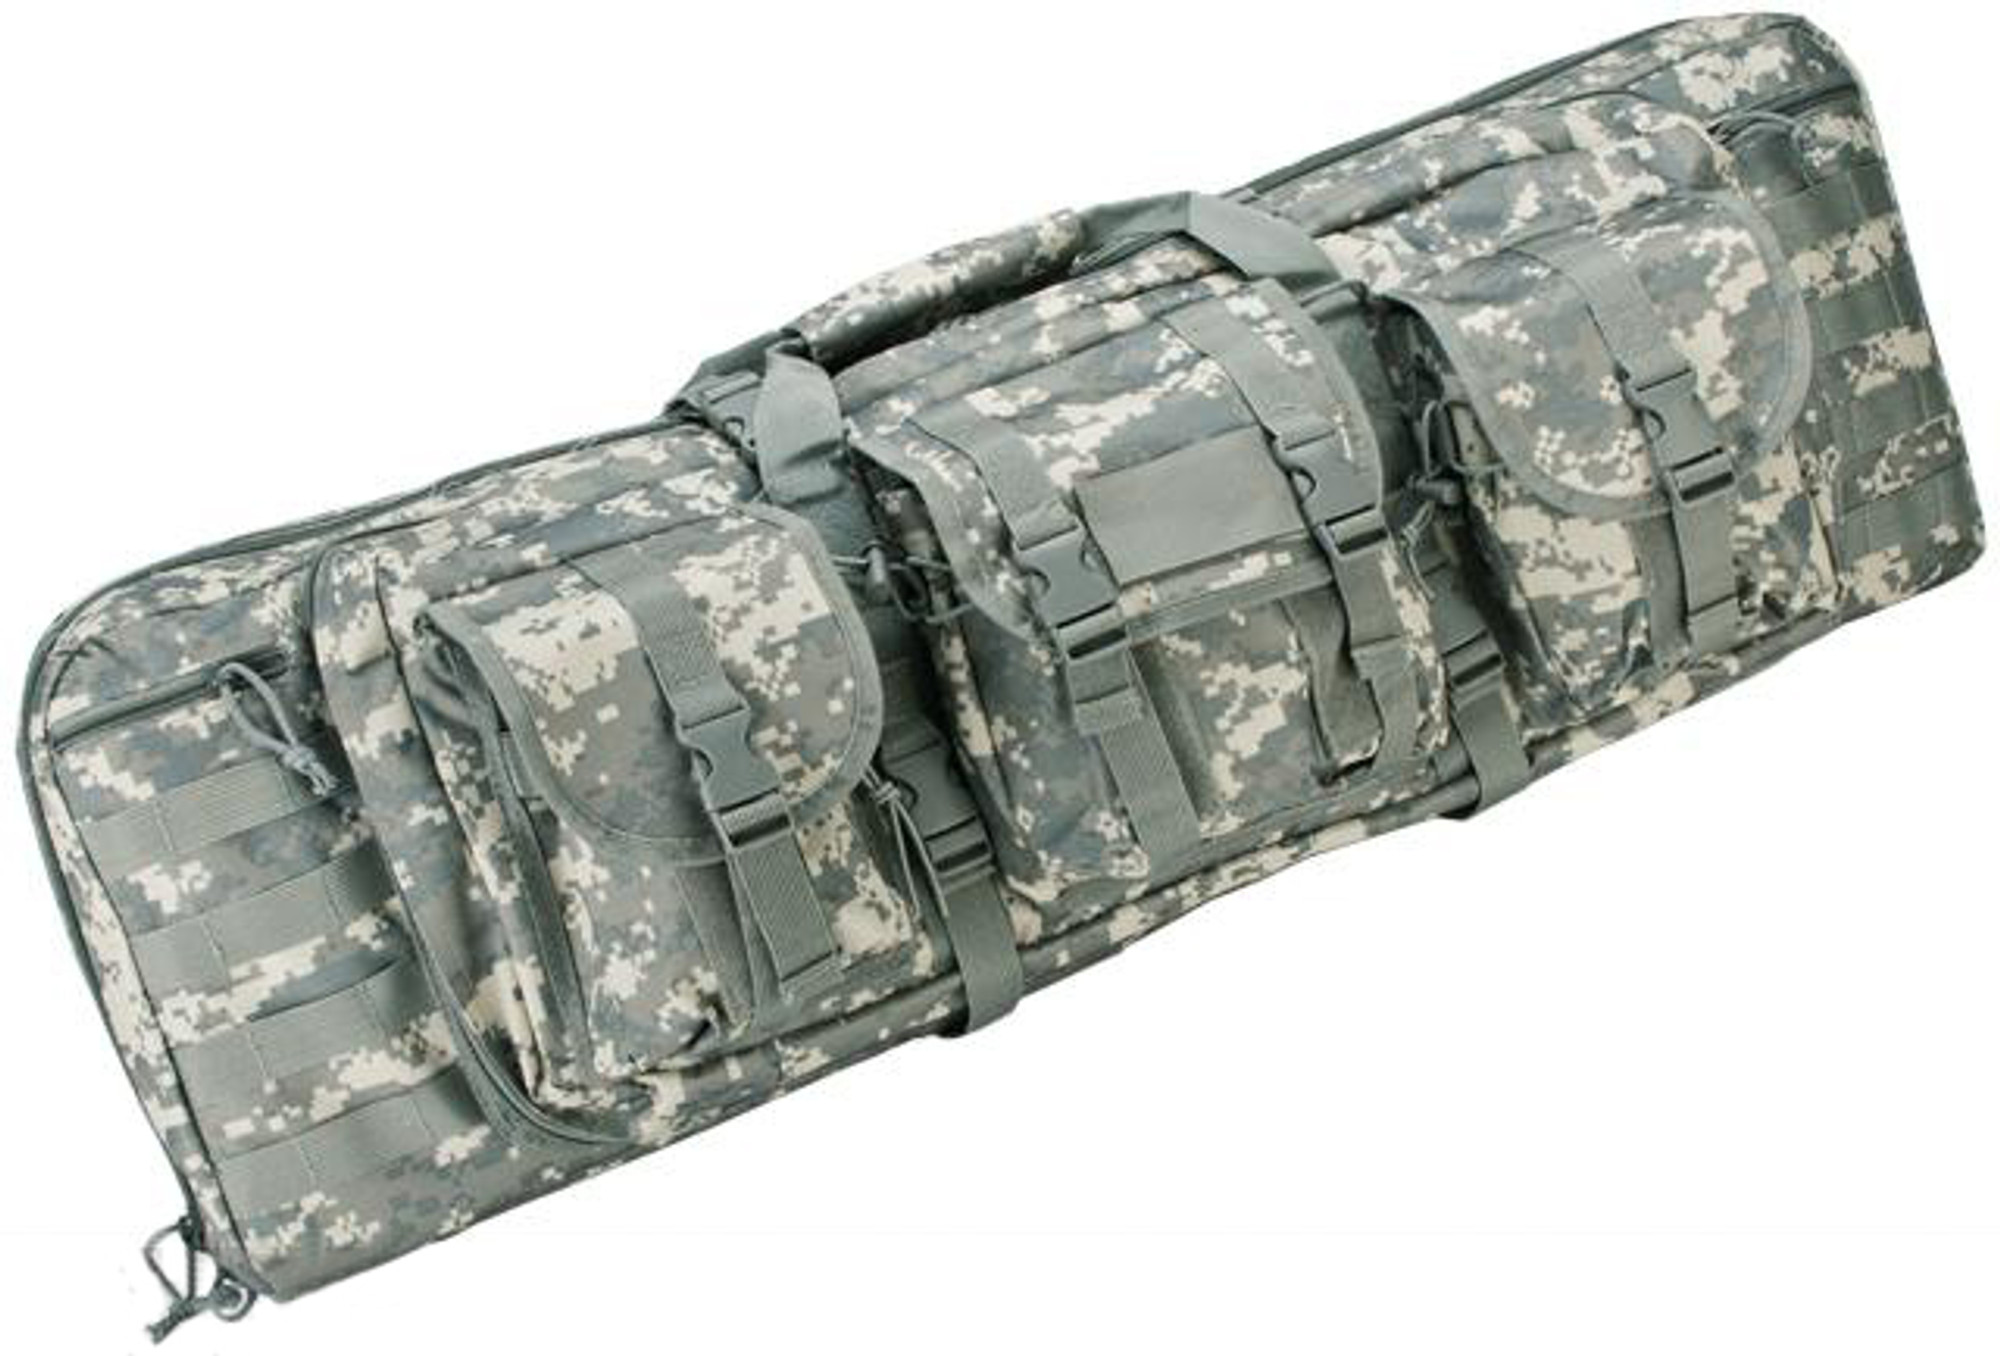 Combat Featured 36" Ultimate Dual Weapon Case Rifle Bag (ACU)